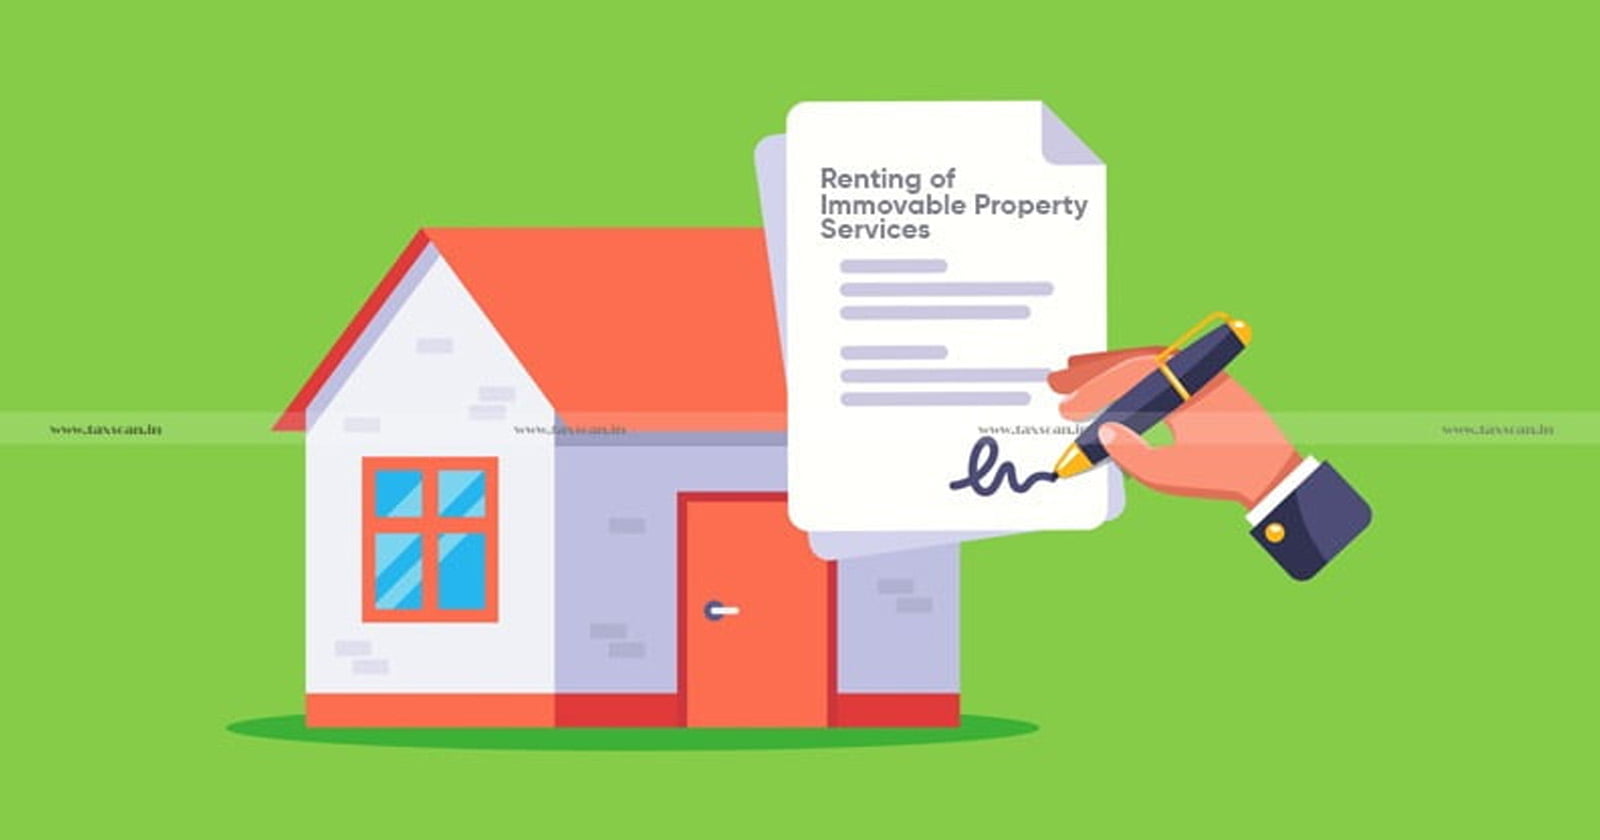 Penalty - Renting of Immovable Property Service - Renting - Immovable Property - Reasonable Cause - Discharging Service Tax Liability - Service Tax Liability - Tax Liability - CESTAT - taxscan